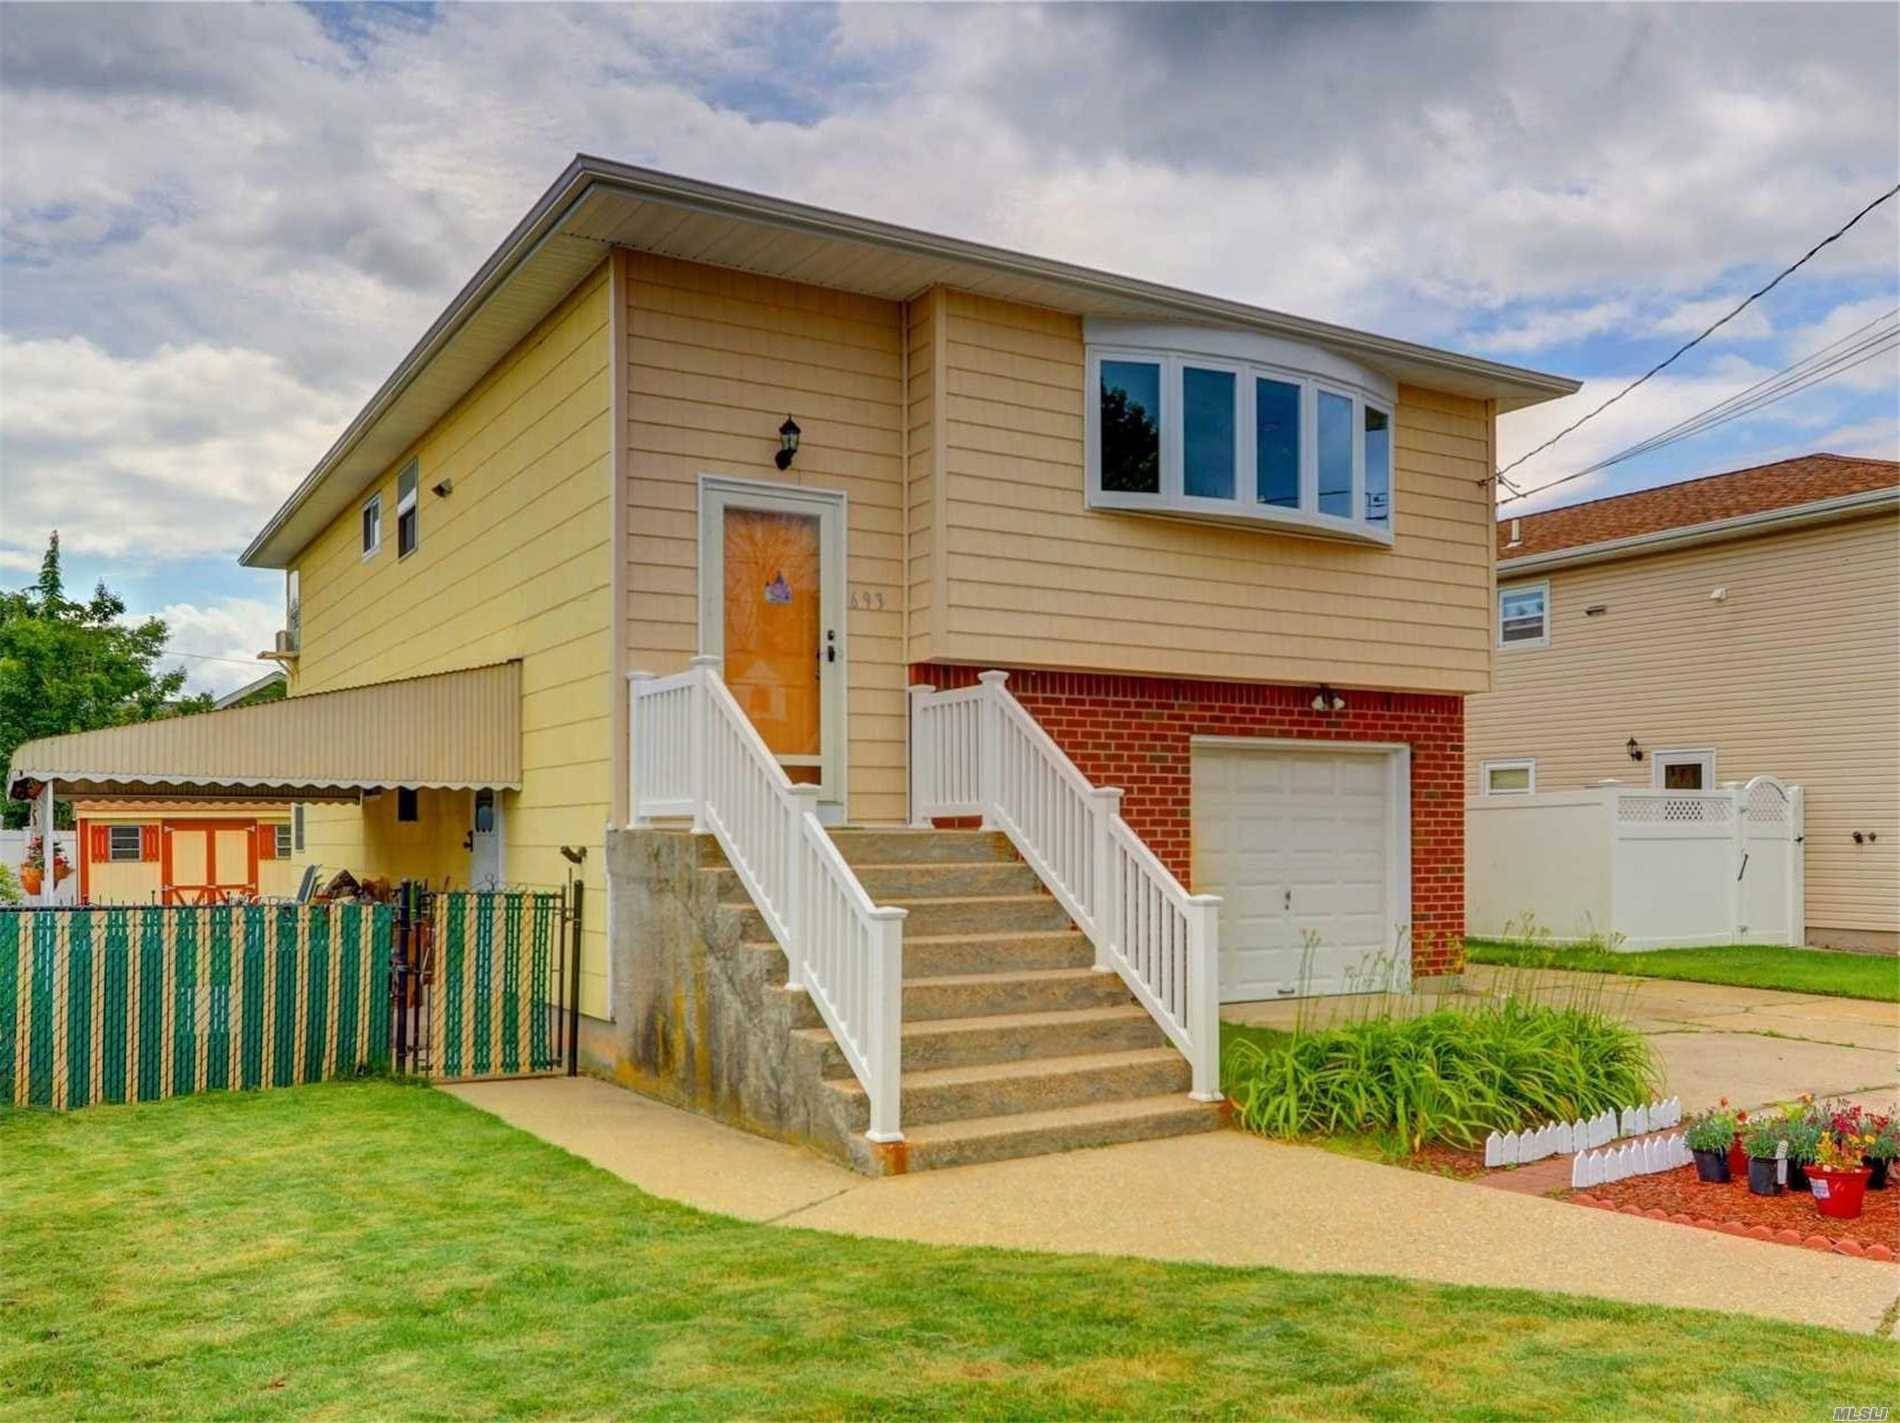 9 Room In Line Hi Ranch. Features Include Updated Full Bath, All New Interior Doors, New Pvc Railing, Fairly New Roof, New Front Vinyl Shake Siding, All New Gutters And ...